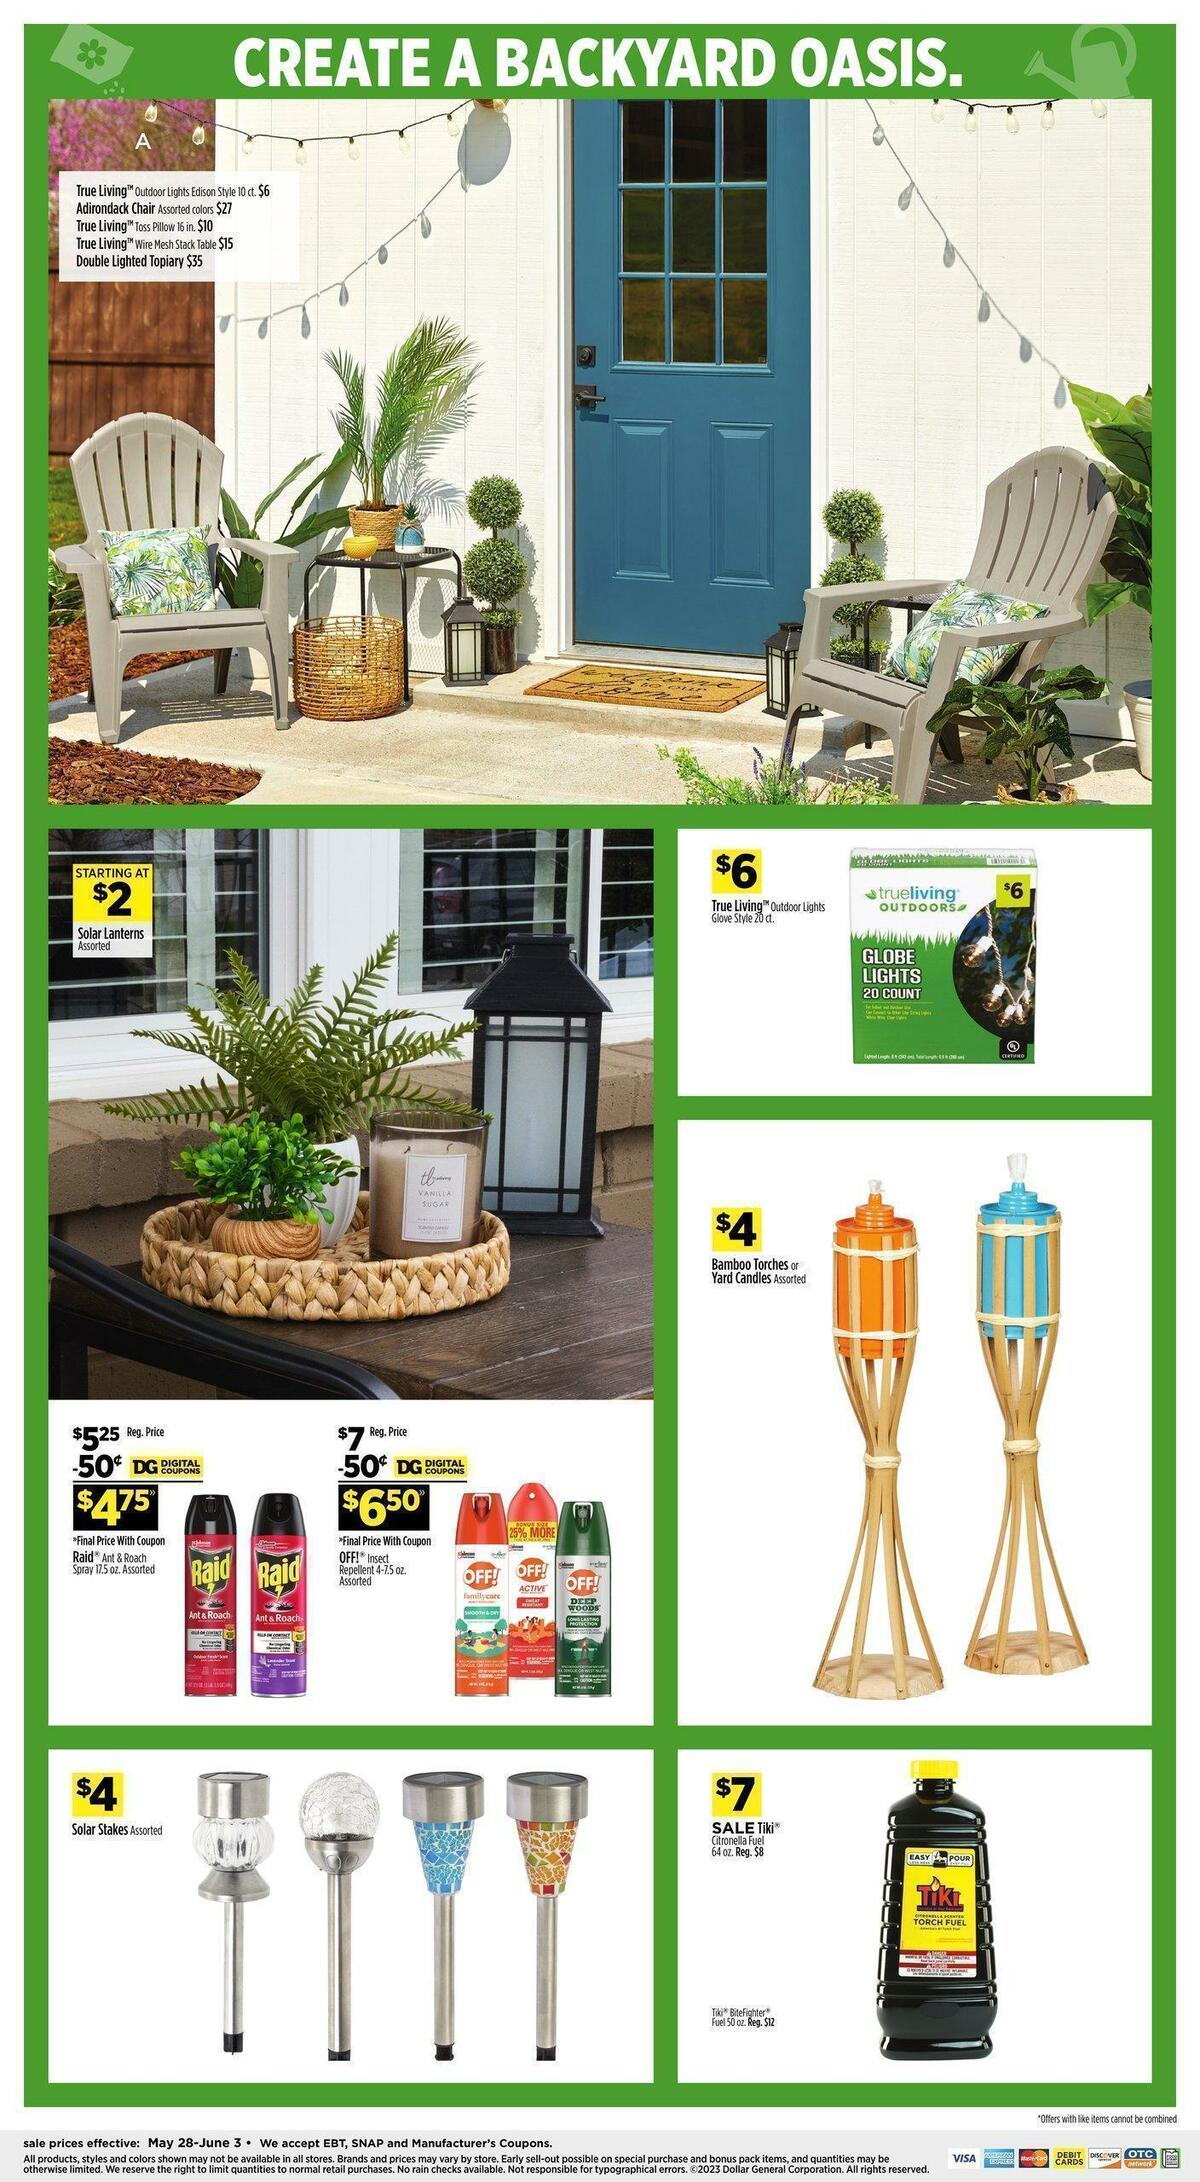 Dollar General Weekly Ad from May 28